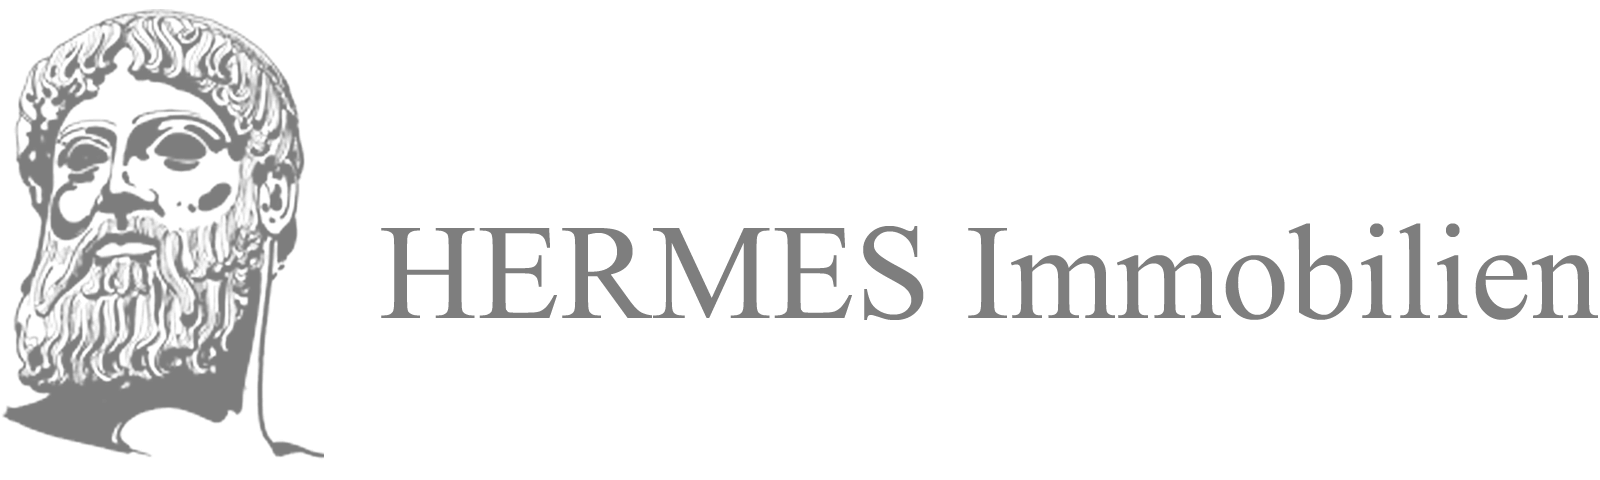 Immobilien auf Fehmarn | HERMES Immobilien GmbH